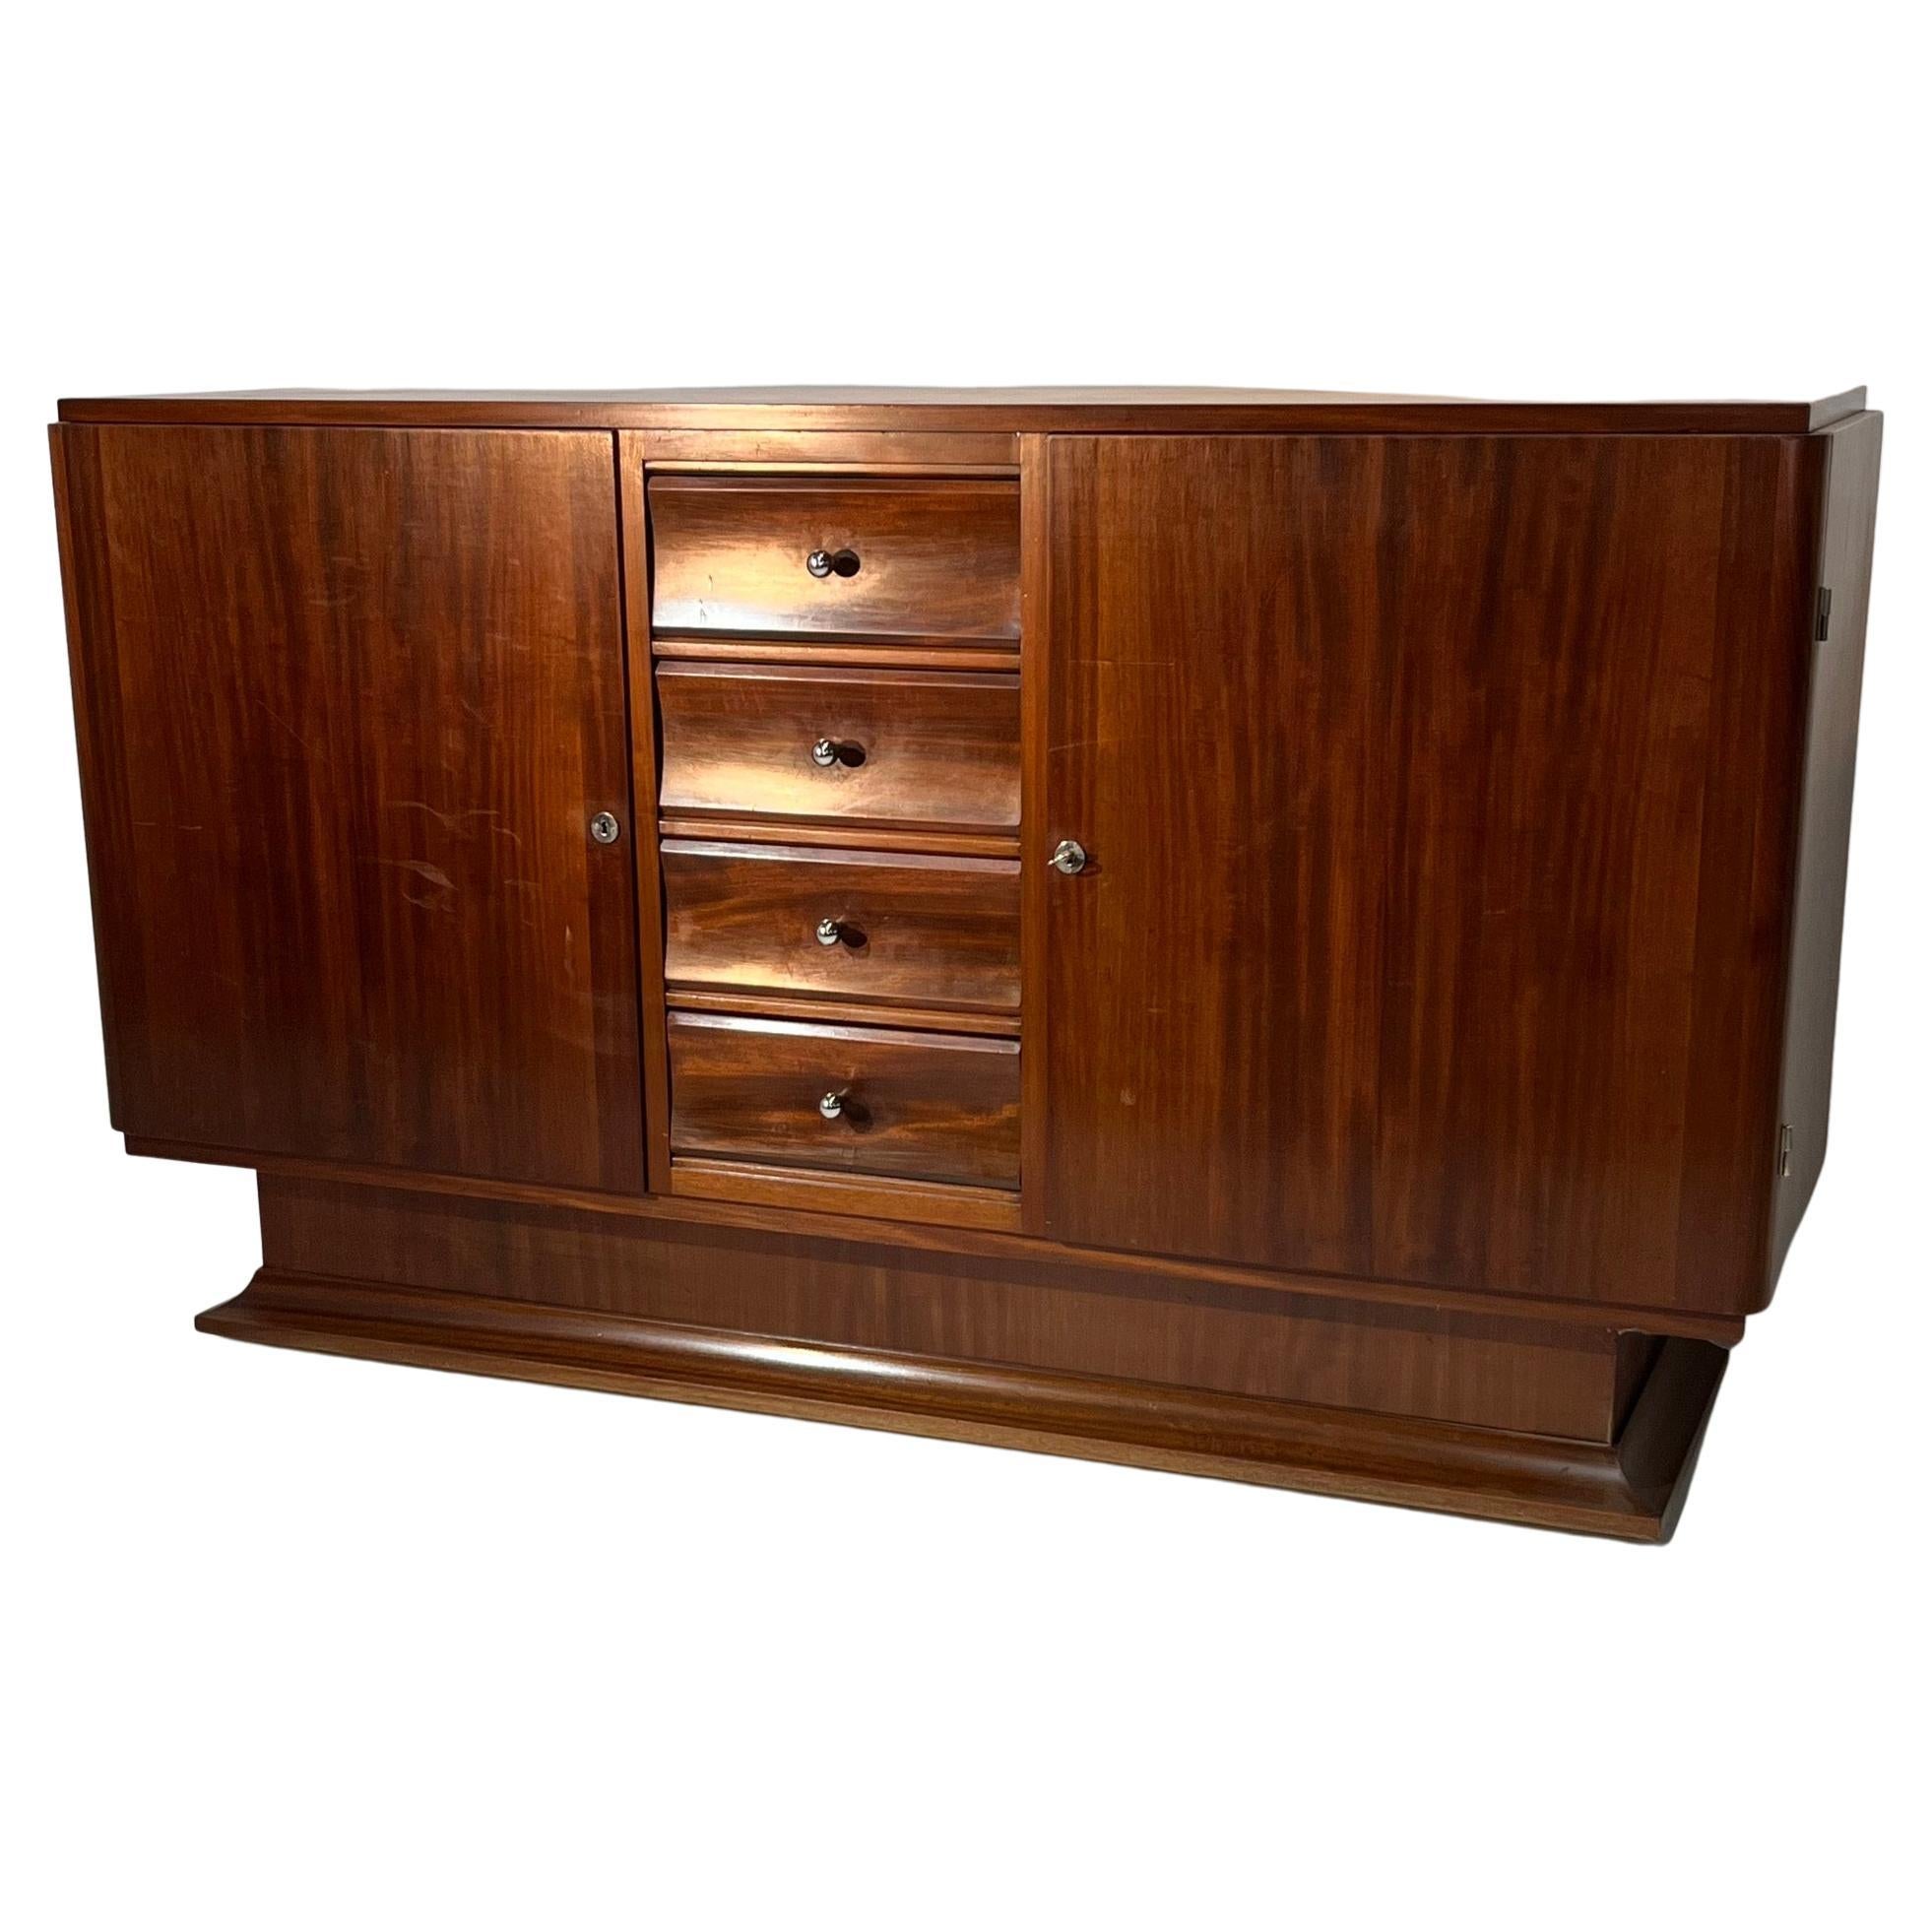 French Art Deco in Solid Mahogany Sideboard Four Drawers in the Middle